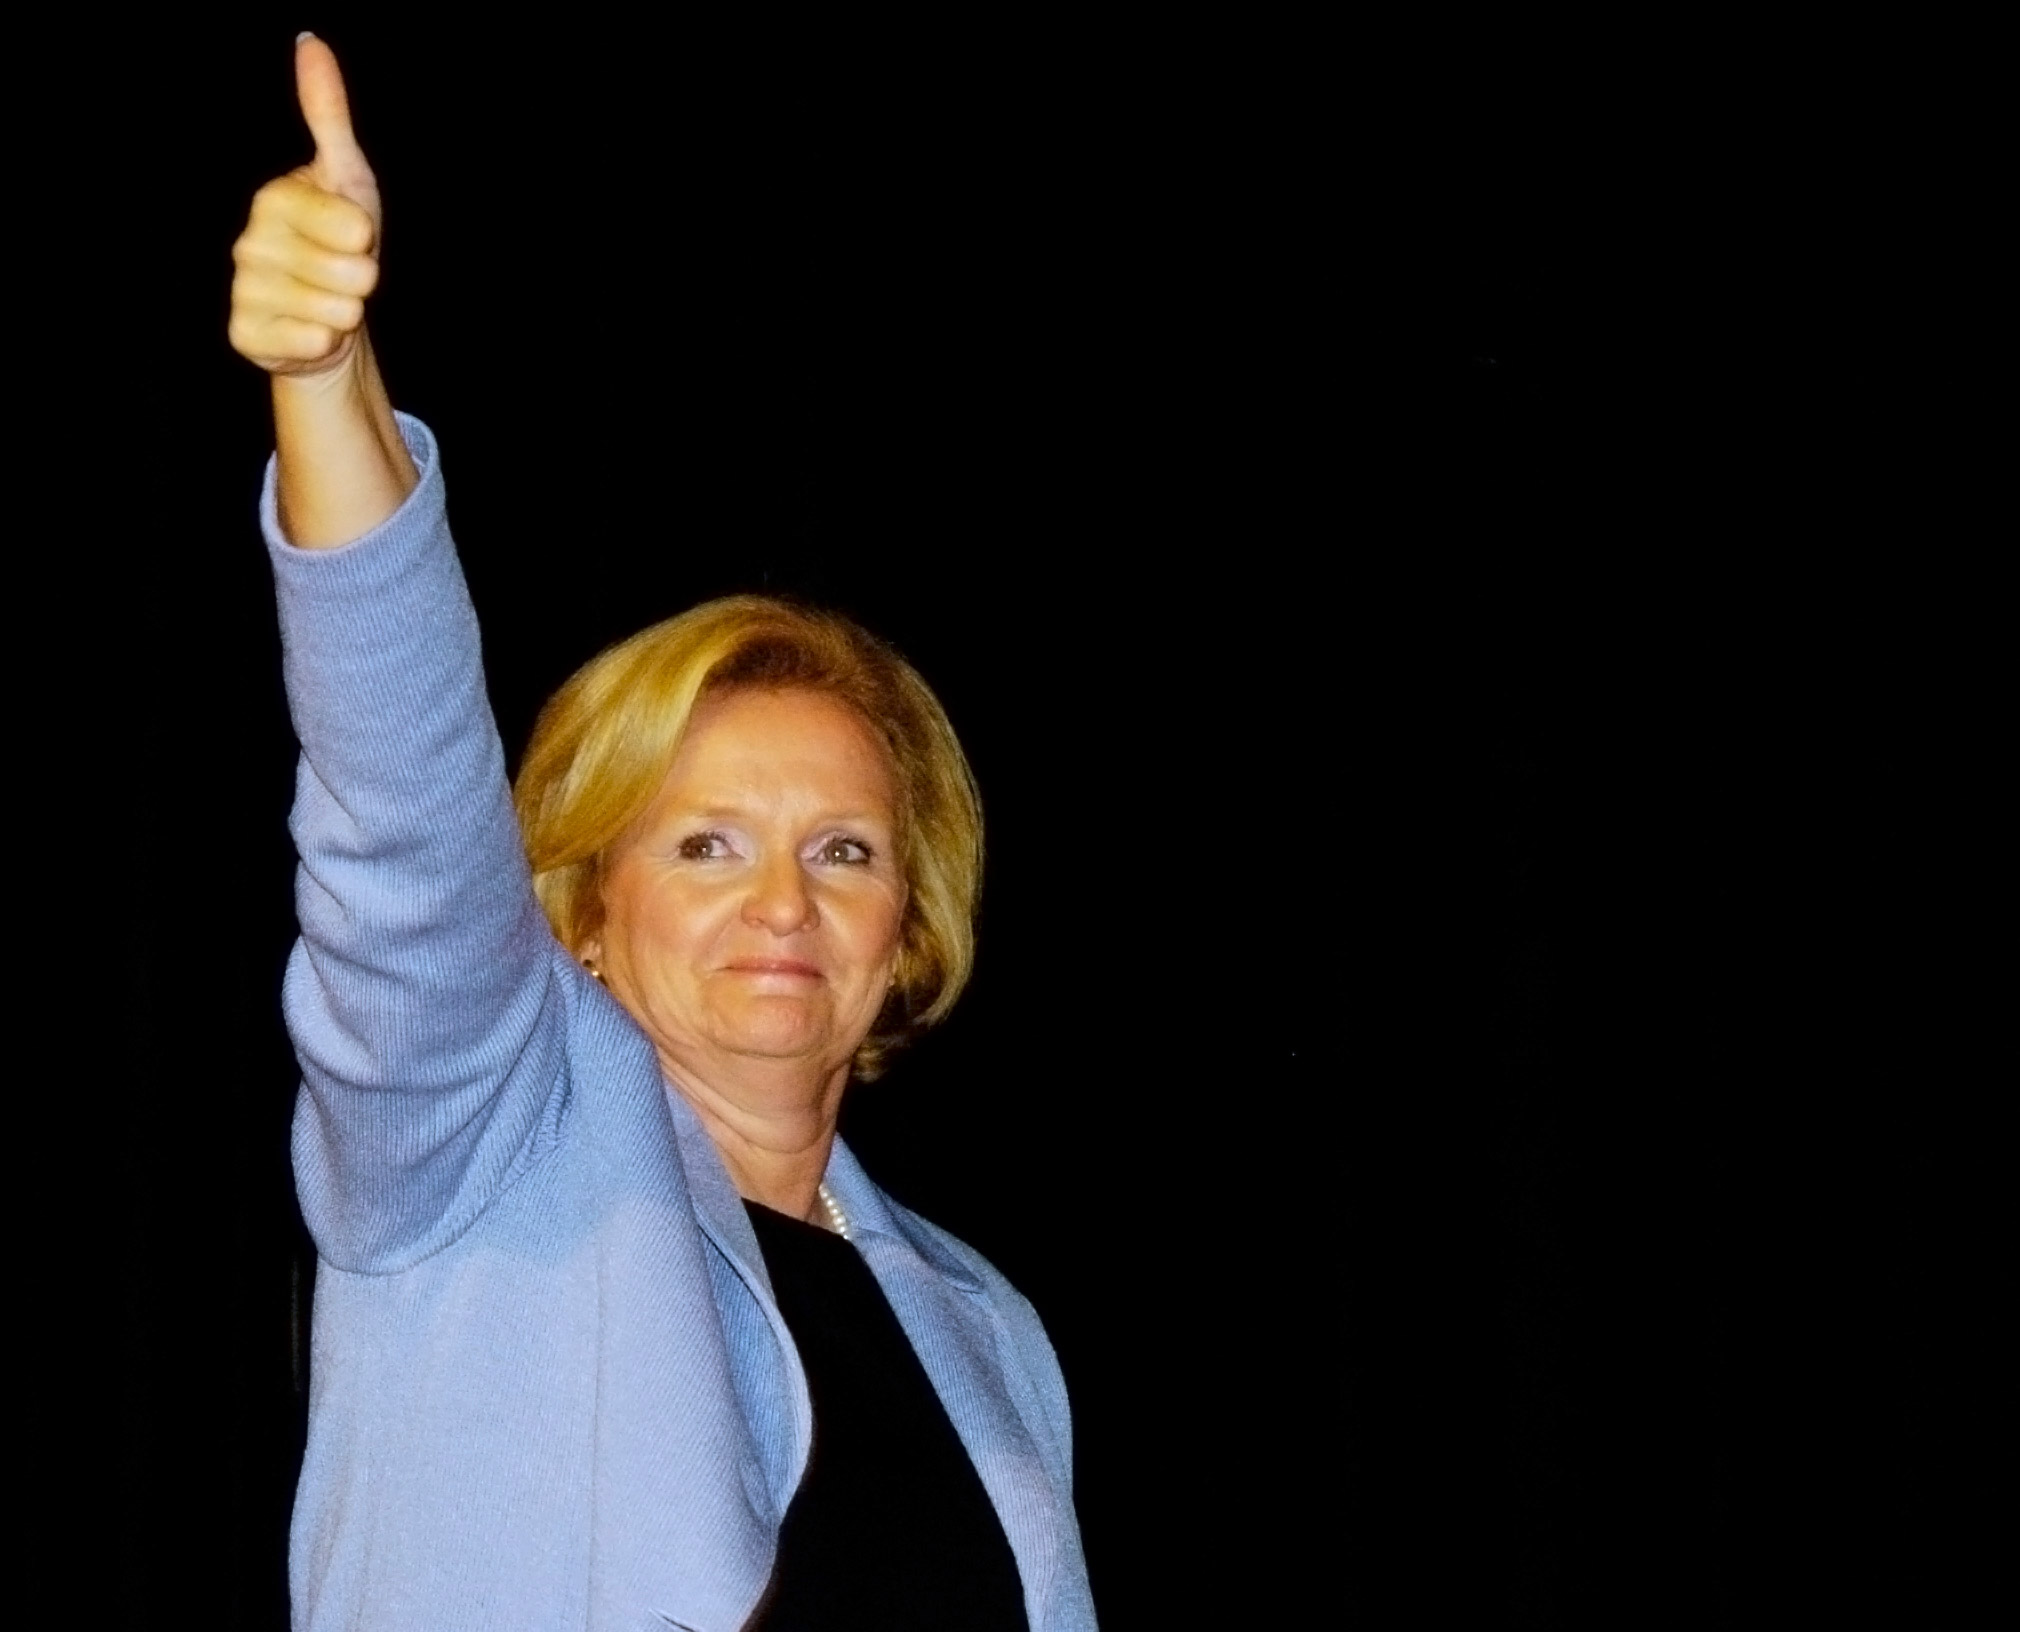 Claire McCaskill, Democratic Missouri U.S. Senate candidate, gestures to the crowd as she prepares to leave the stage with former U.S. President Bill Clinton during a rally Saturday, Sept. 9, 2006, at The Pageant theater in St. Louis.